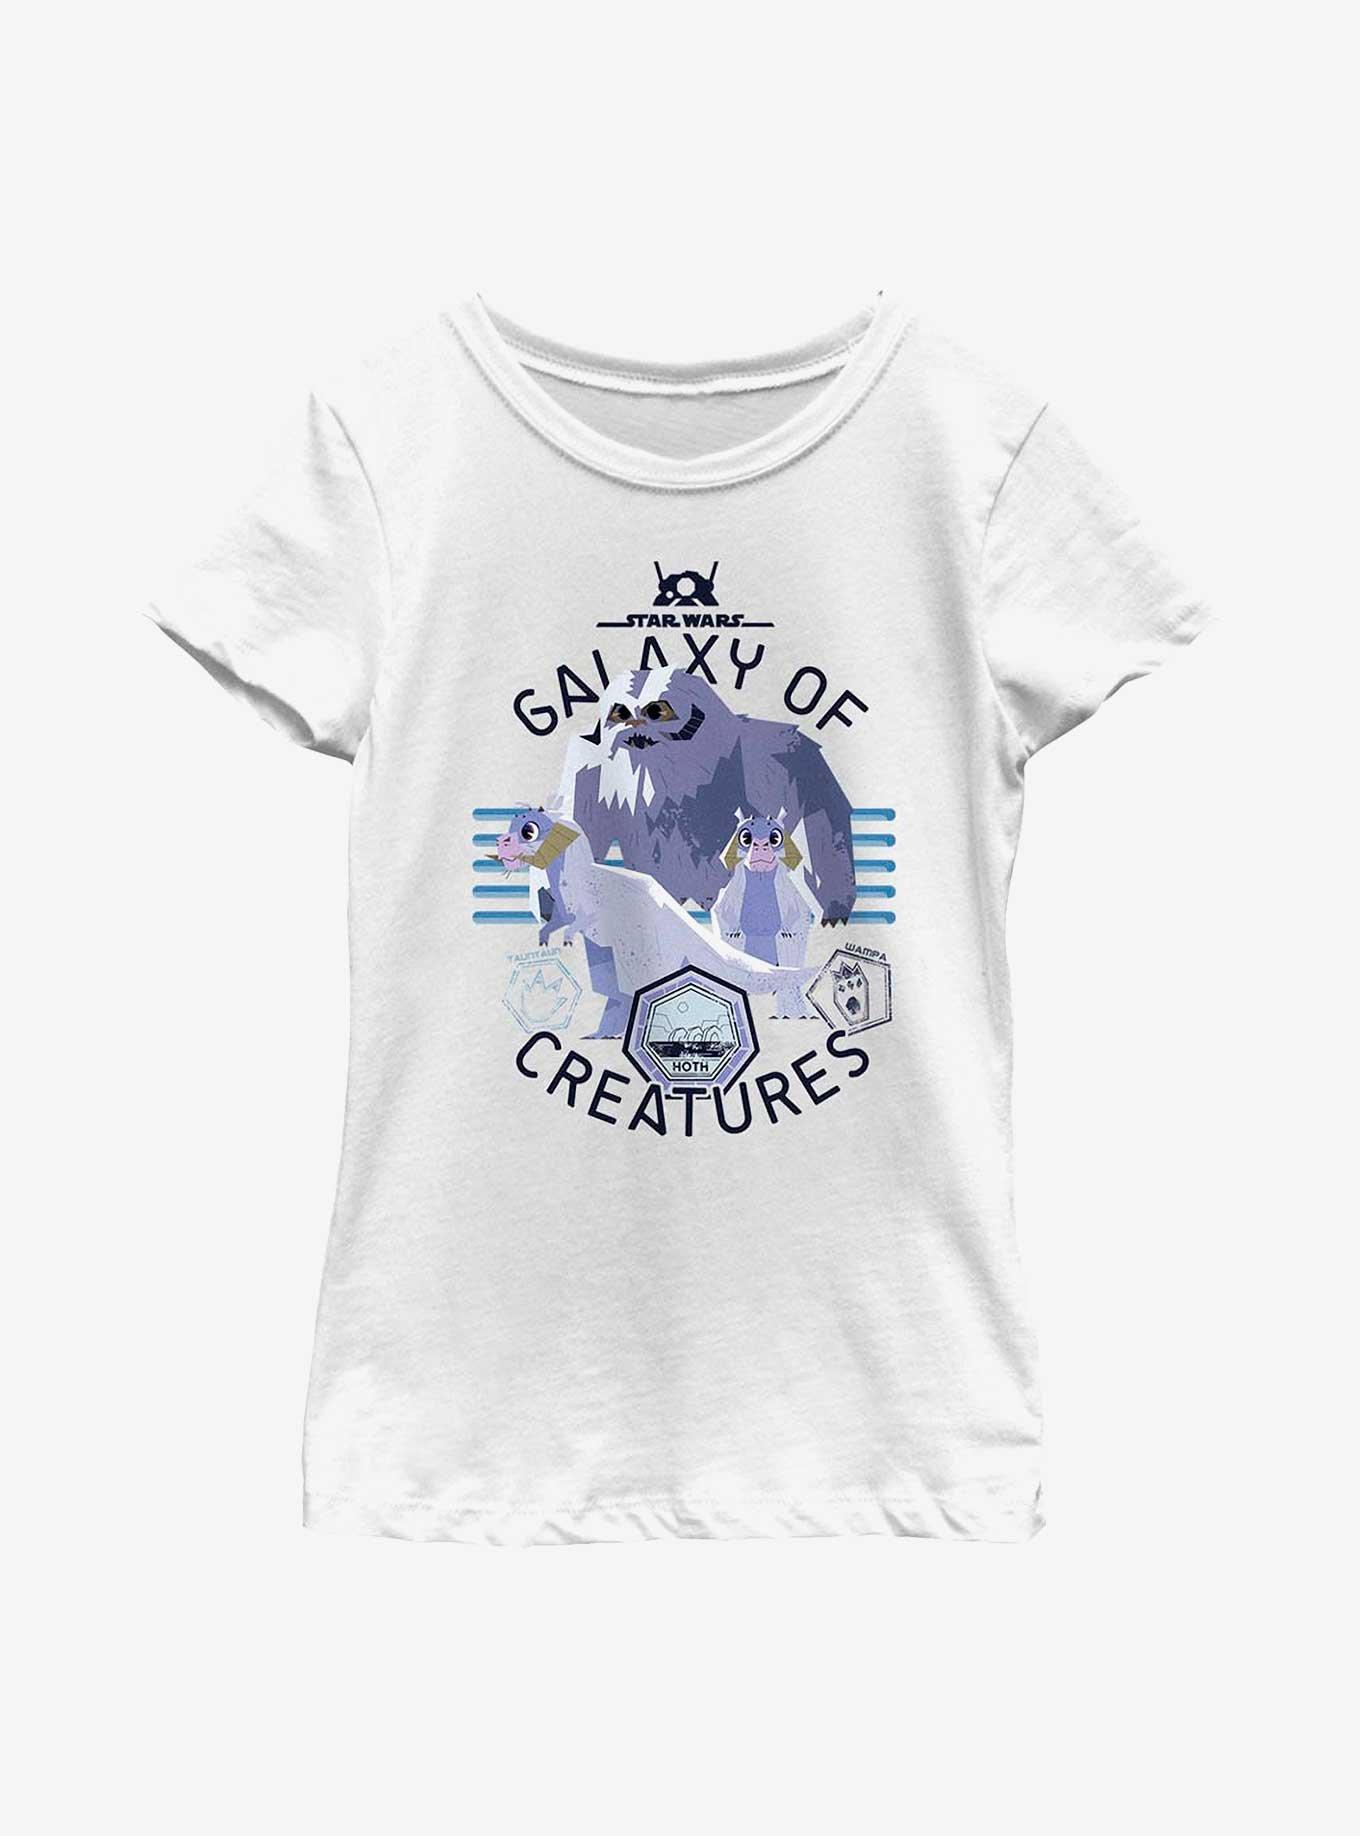 Star Wars Galaxy Of Creatures Hoth Native Species Youth Girls T-Shirt, WHITE, hi-res